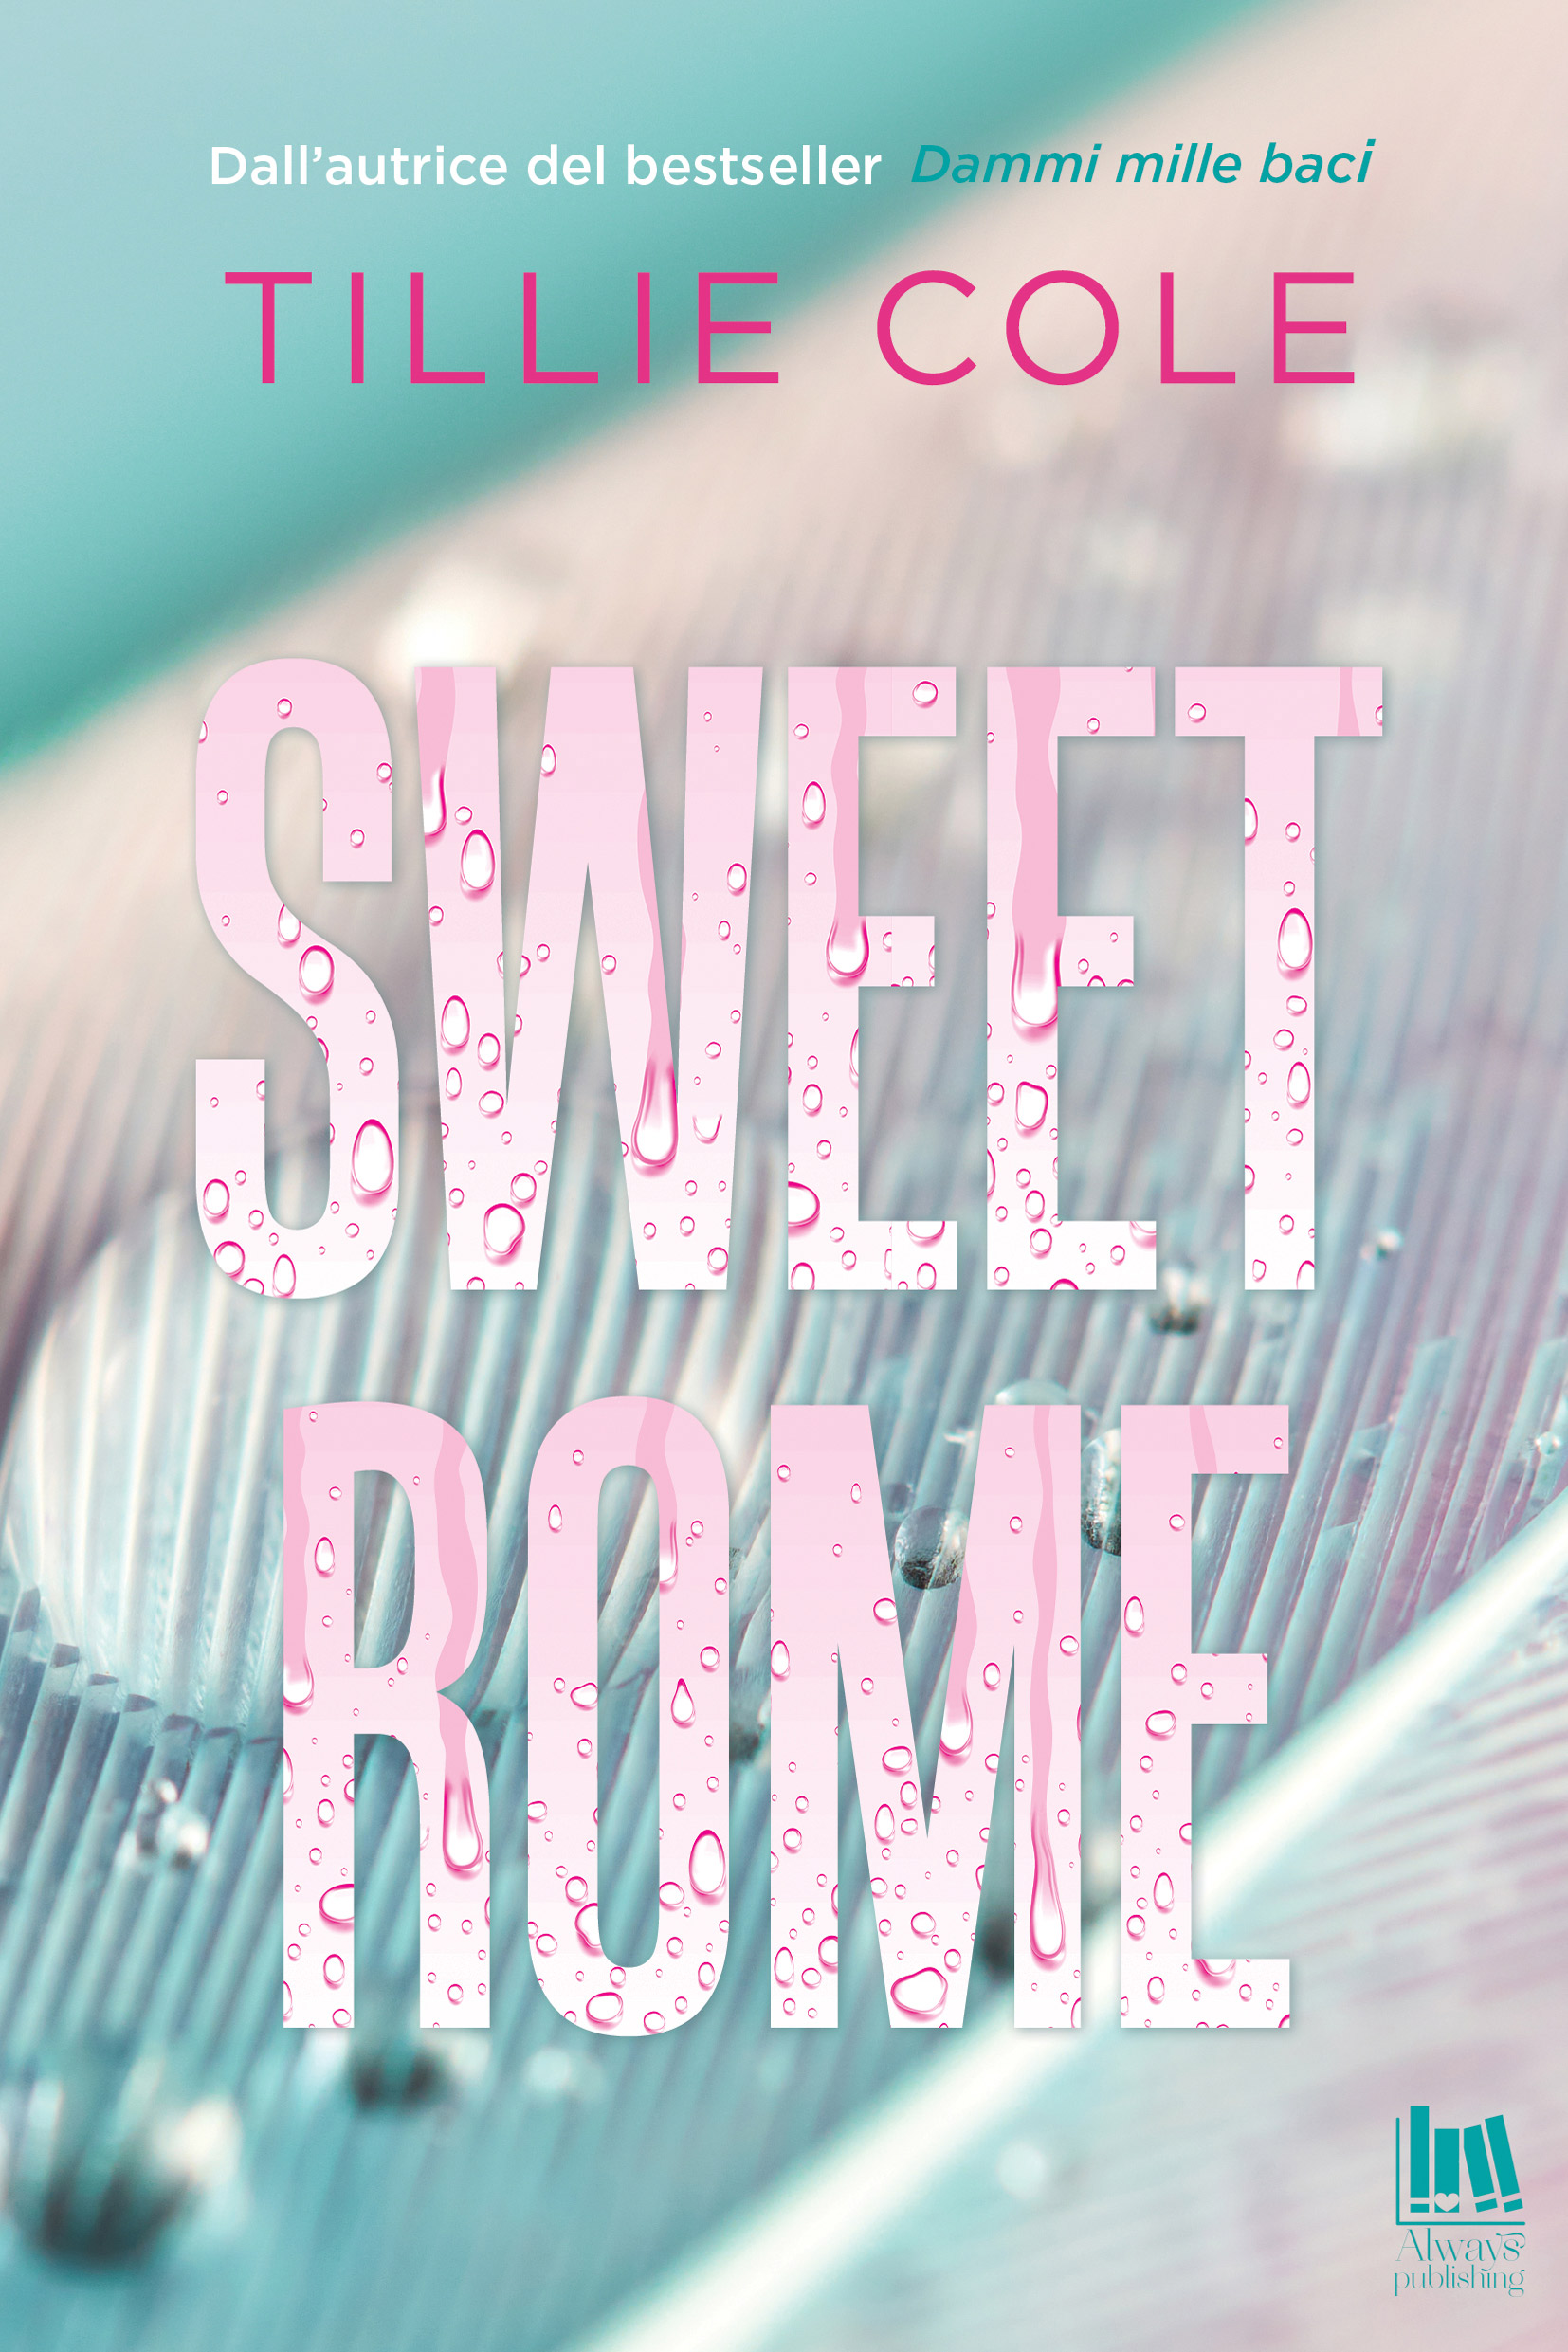 Cover of Sweet Rome